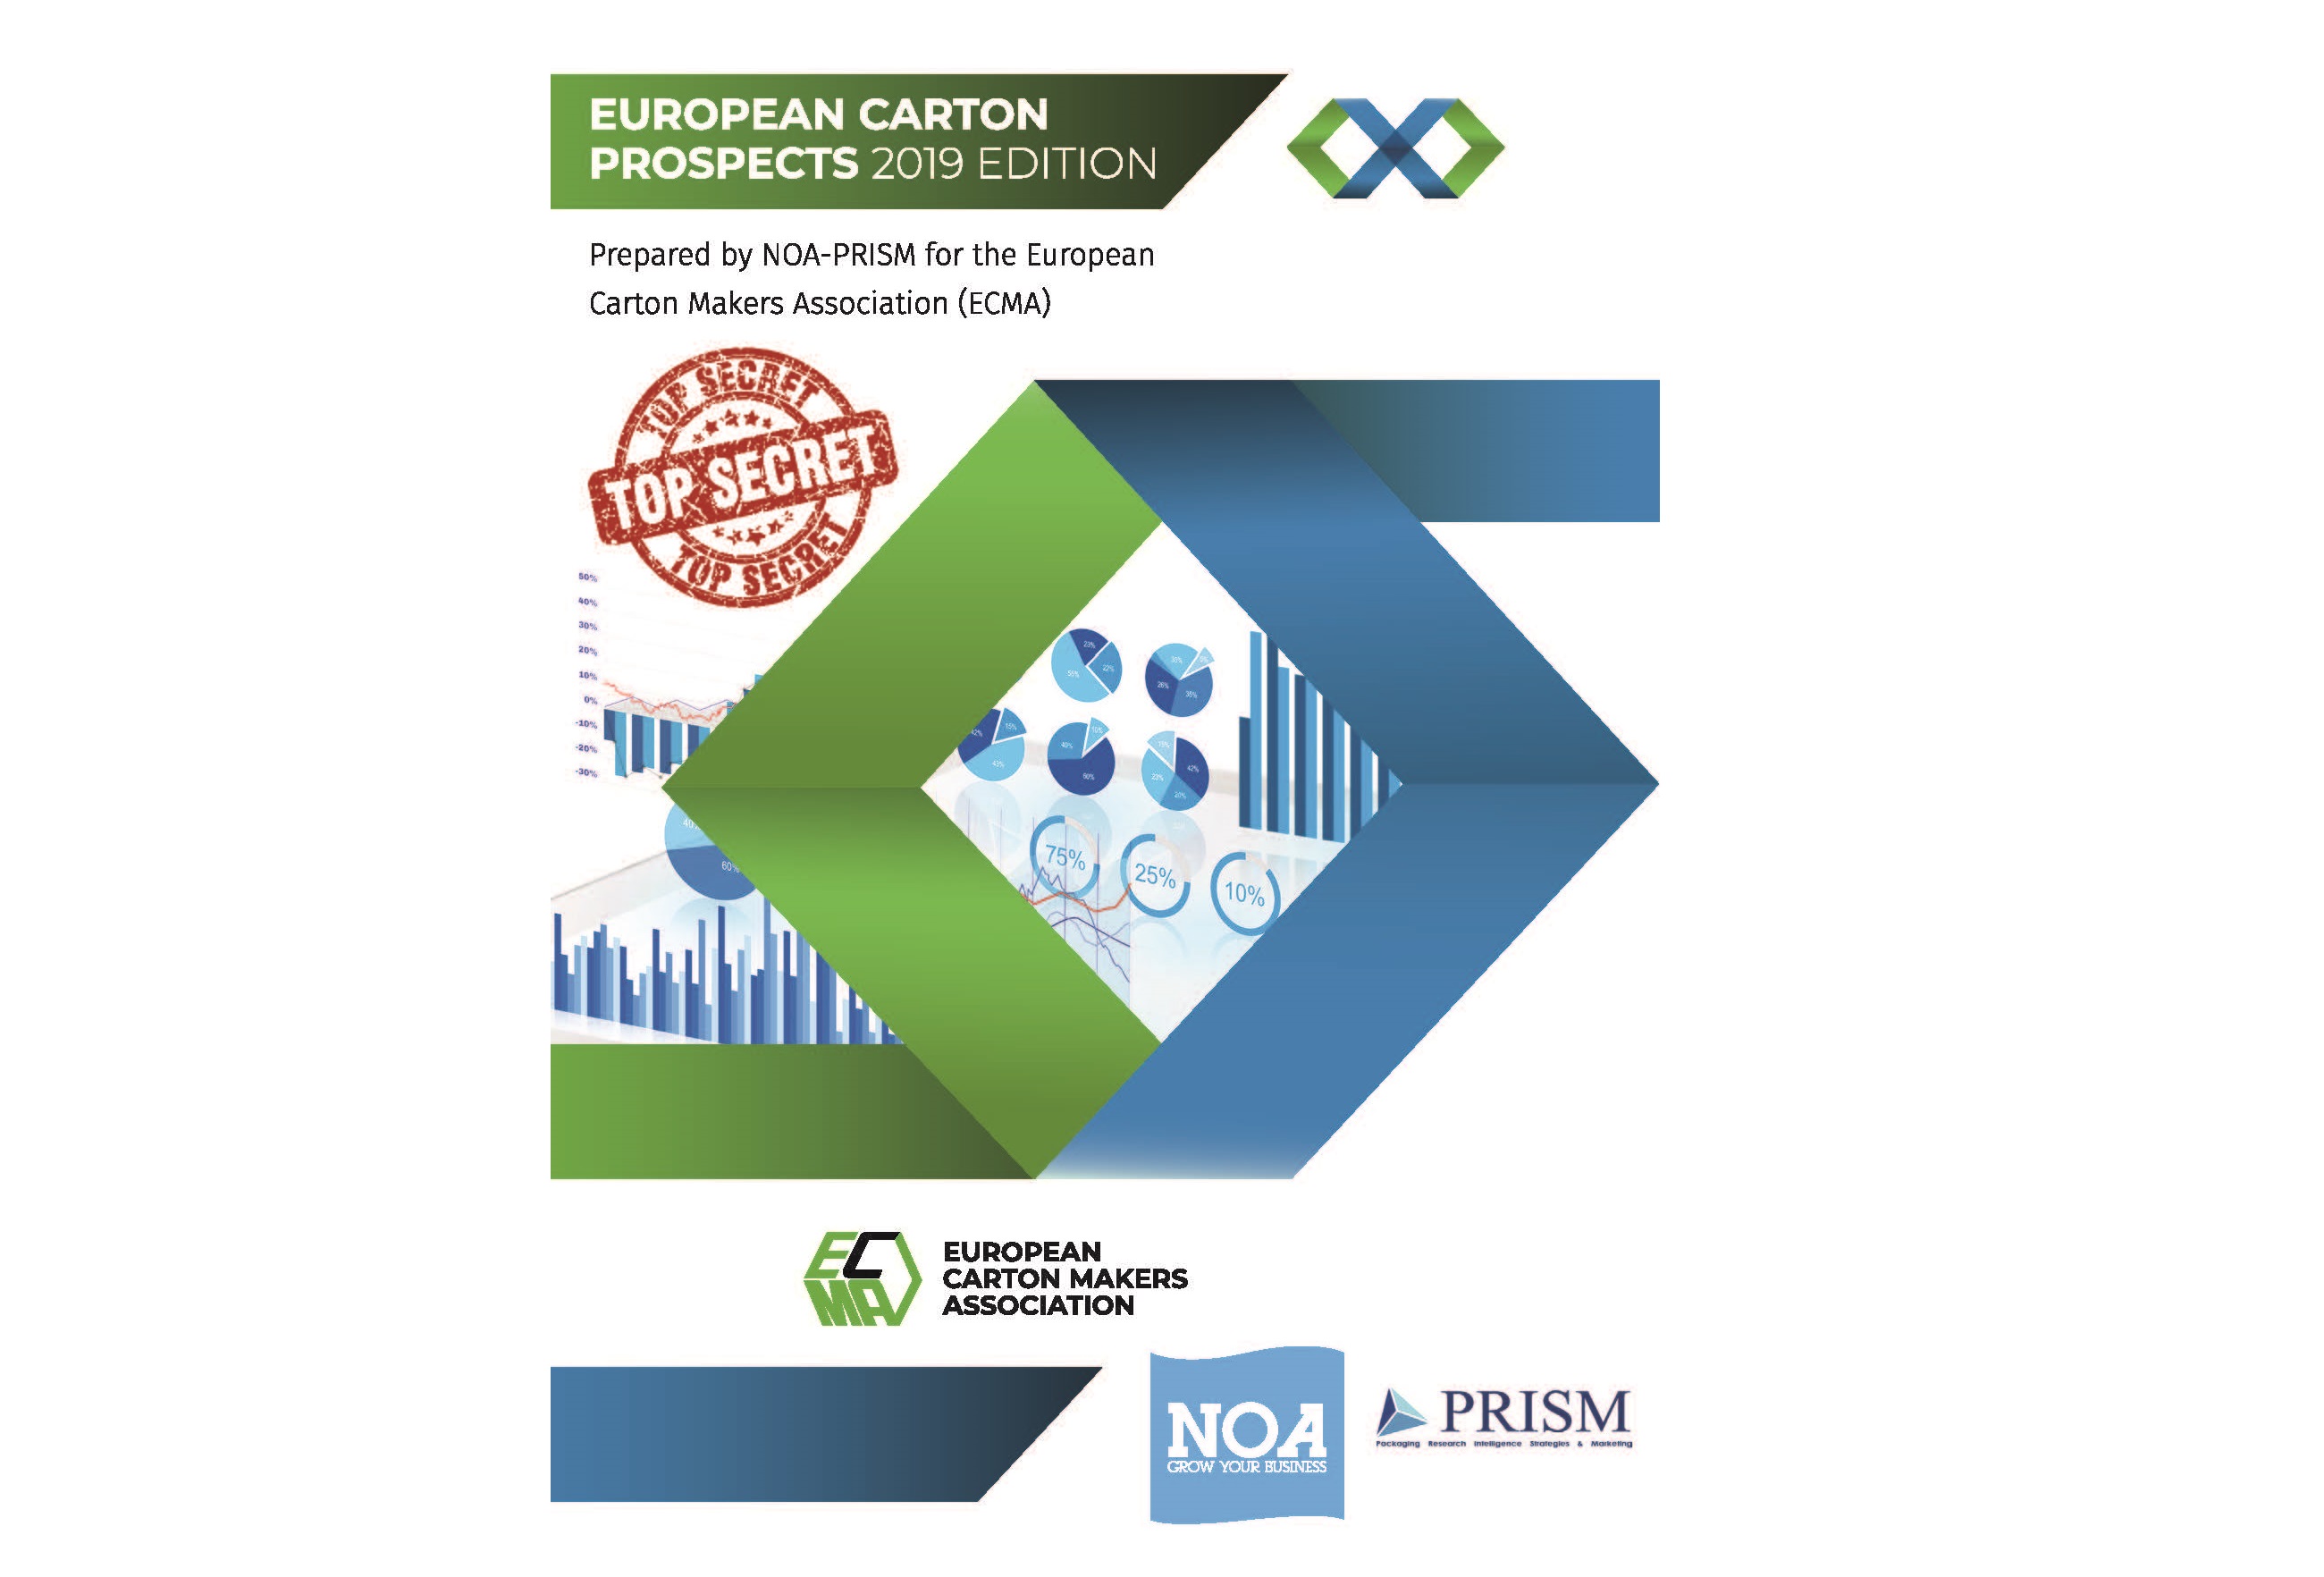 2019 edition of the European Carton Prospects Report 